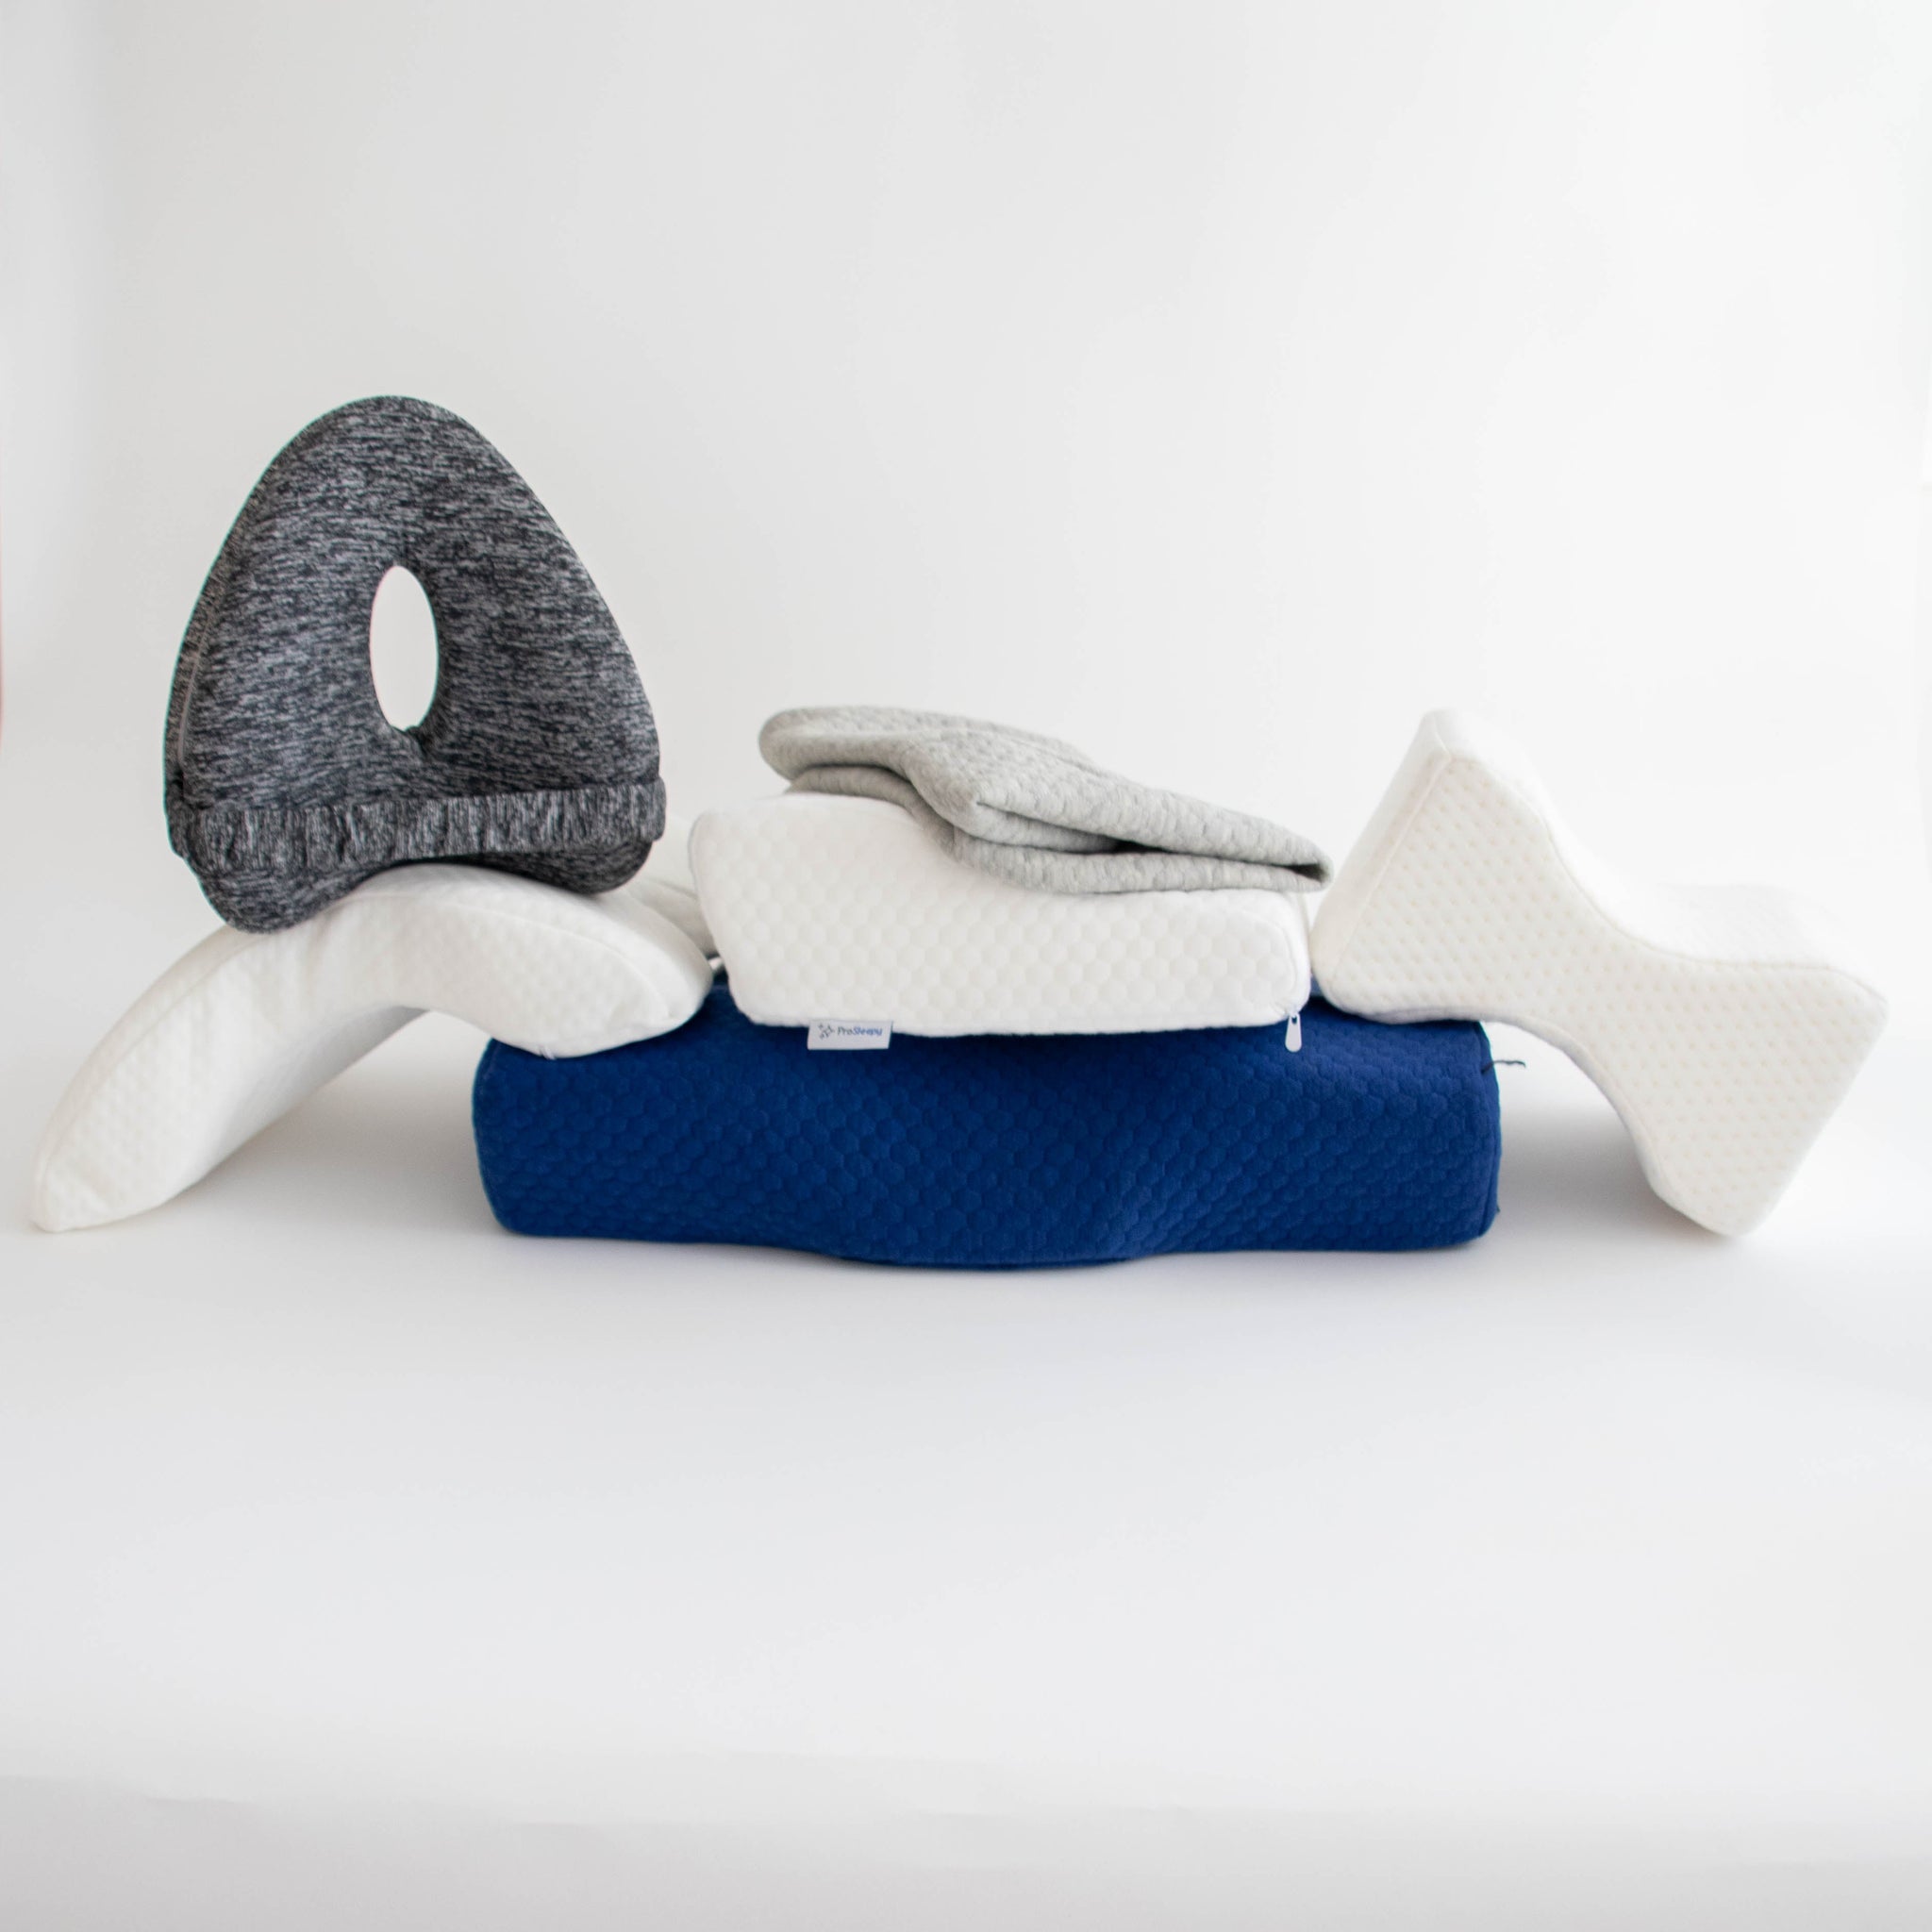 Benefits of Sleeping with a Knee Pillow - COMFYCENTRE®